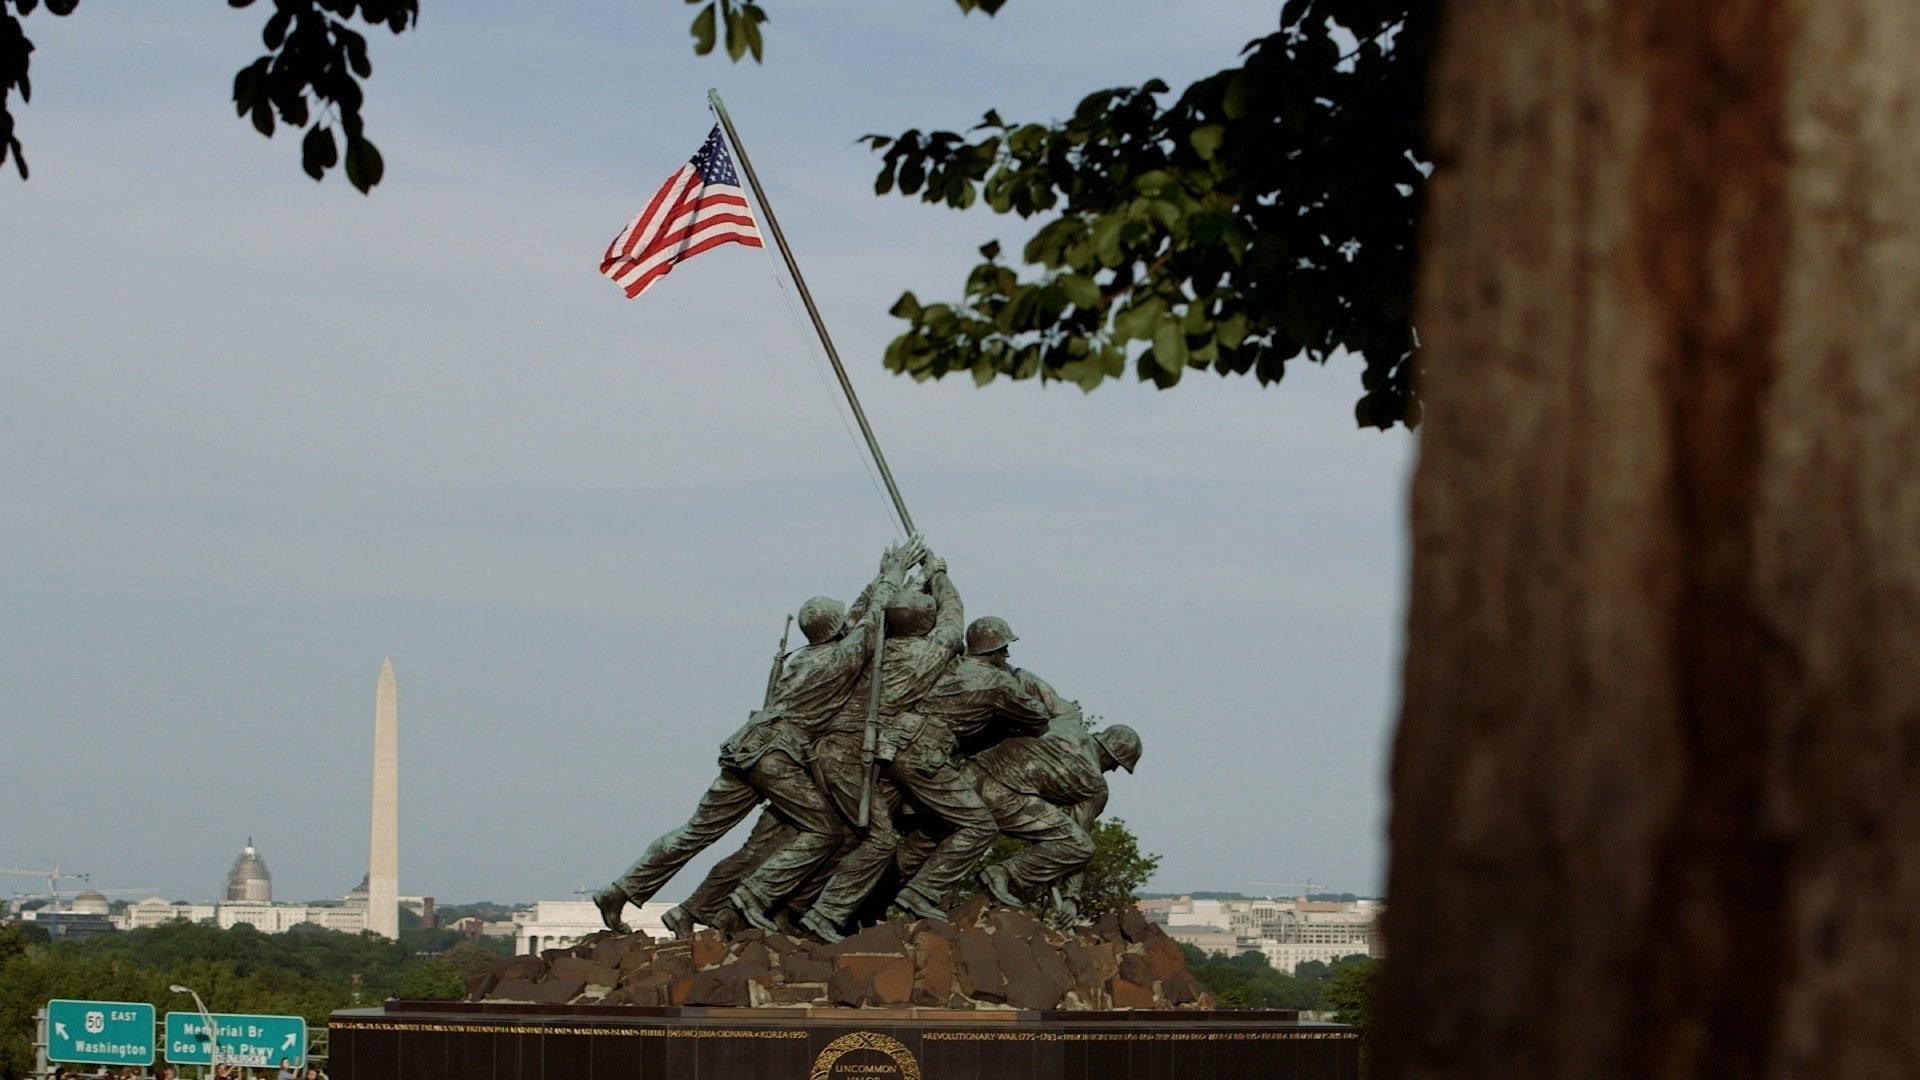 1920x1080 The Marine Corps Memorial in Washington D.C. is based on an iconic image of  a flag